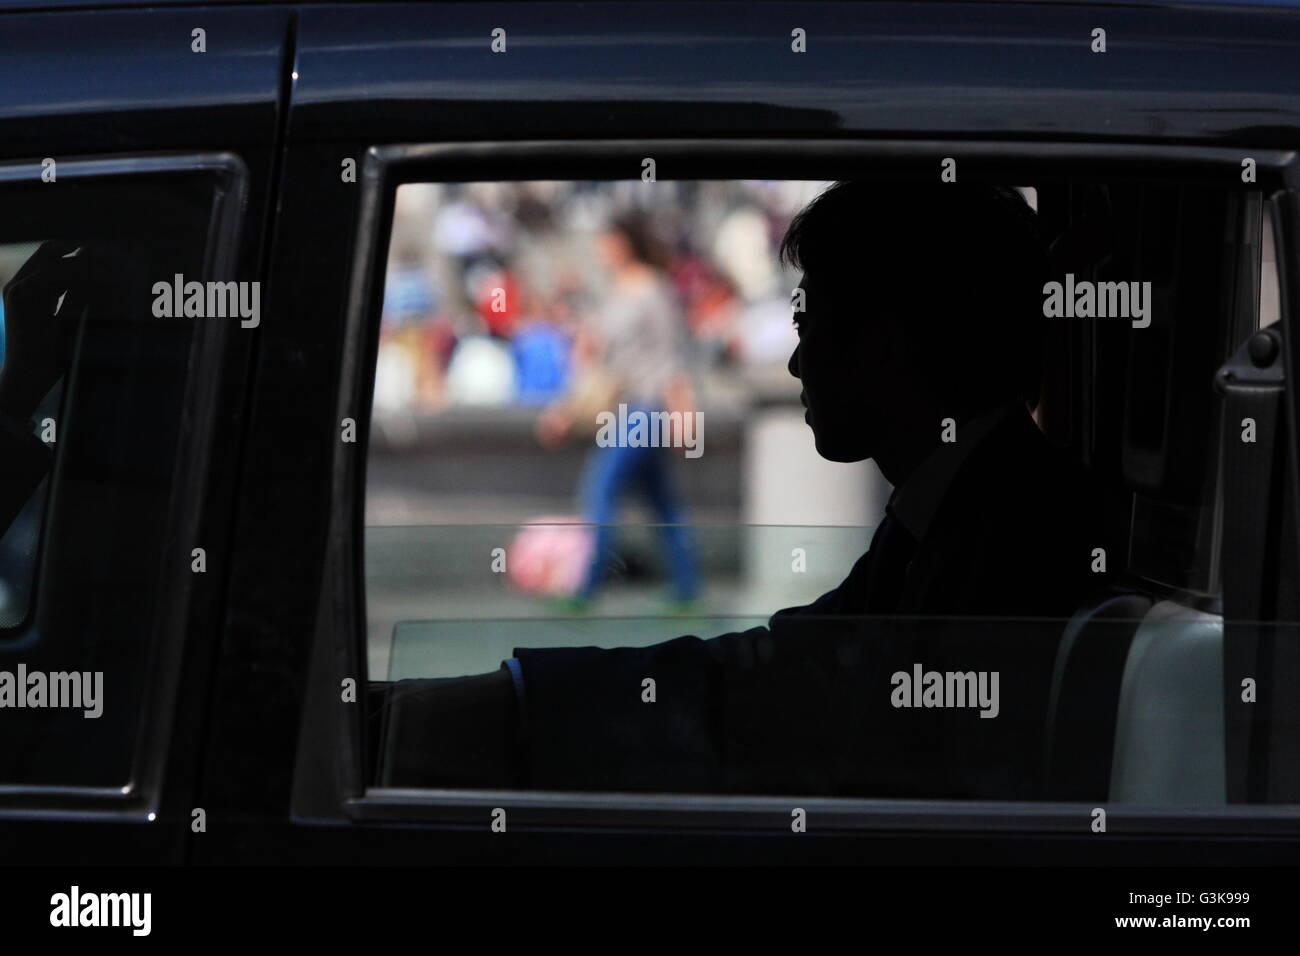 Silhouette of a male looking out of a taxi window in Trafalgar Square, London, England. Stock Photo